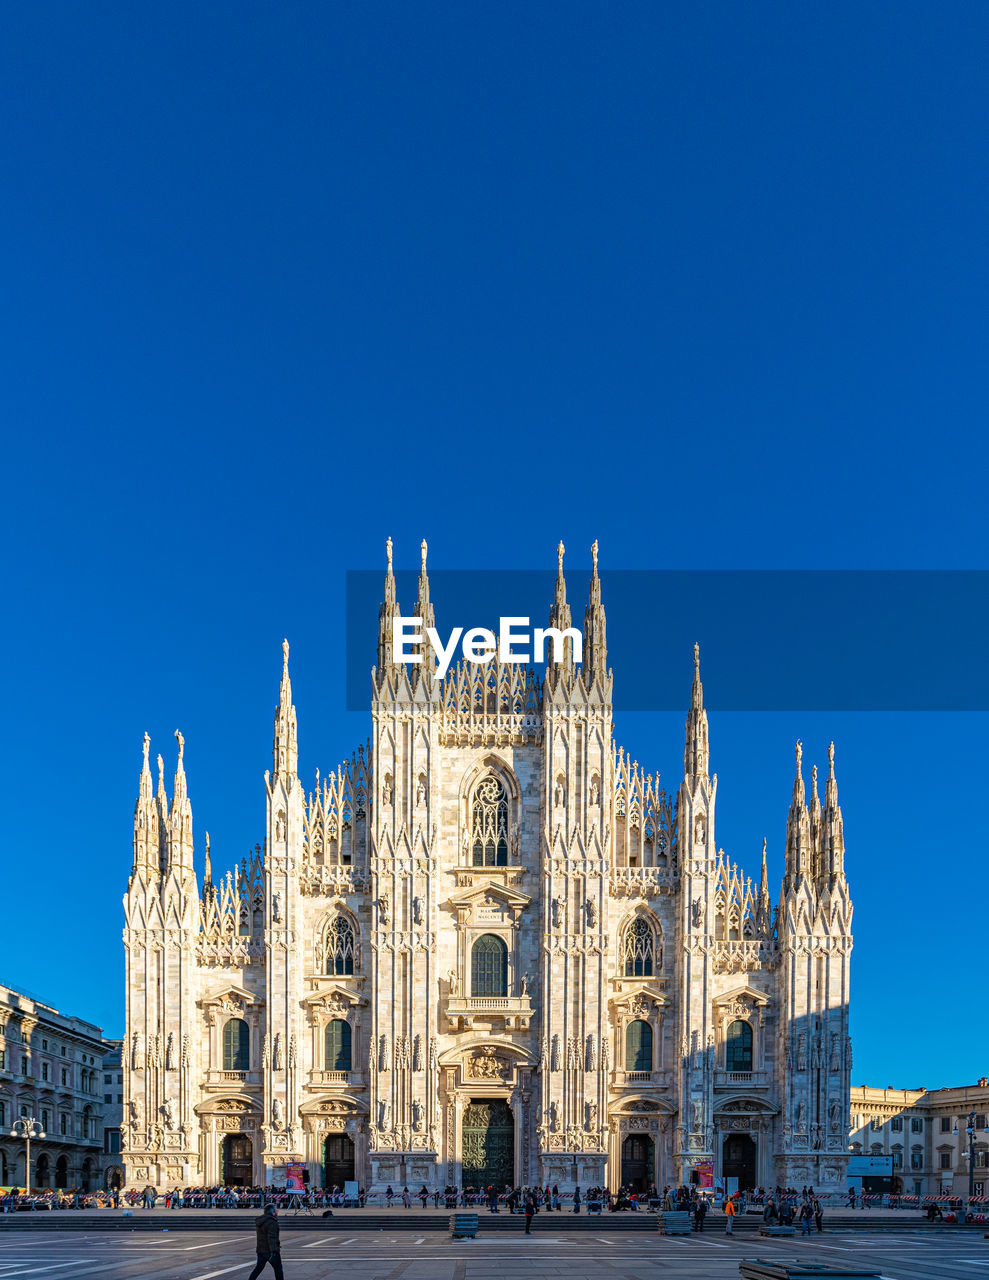 Vertical view of the famous church duomo di milano in milan, italy